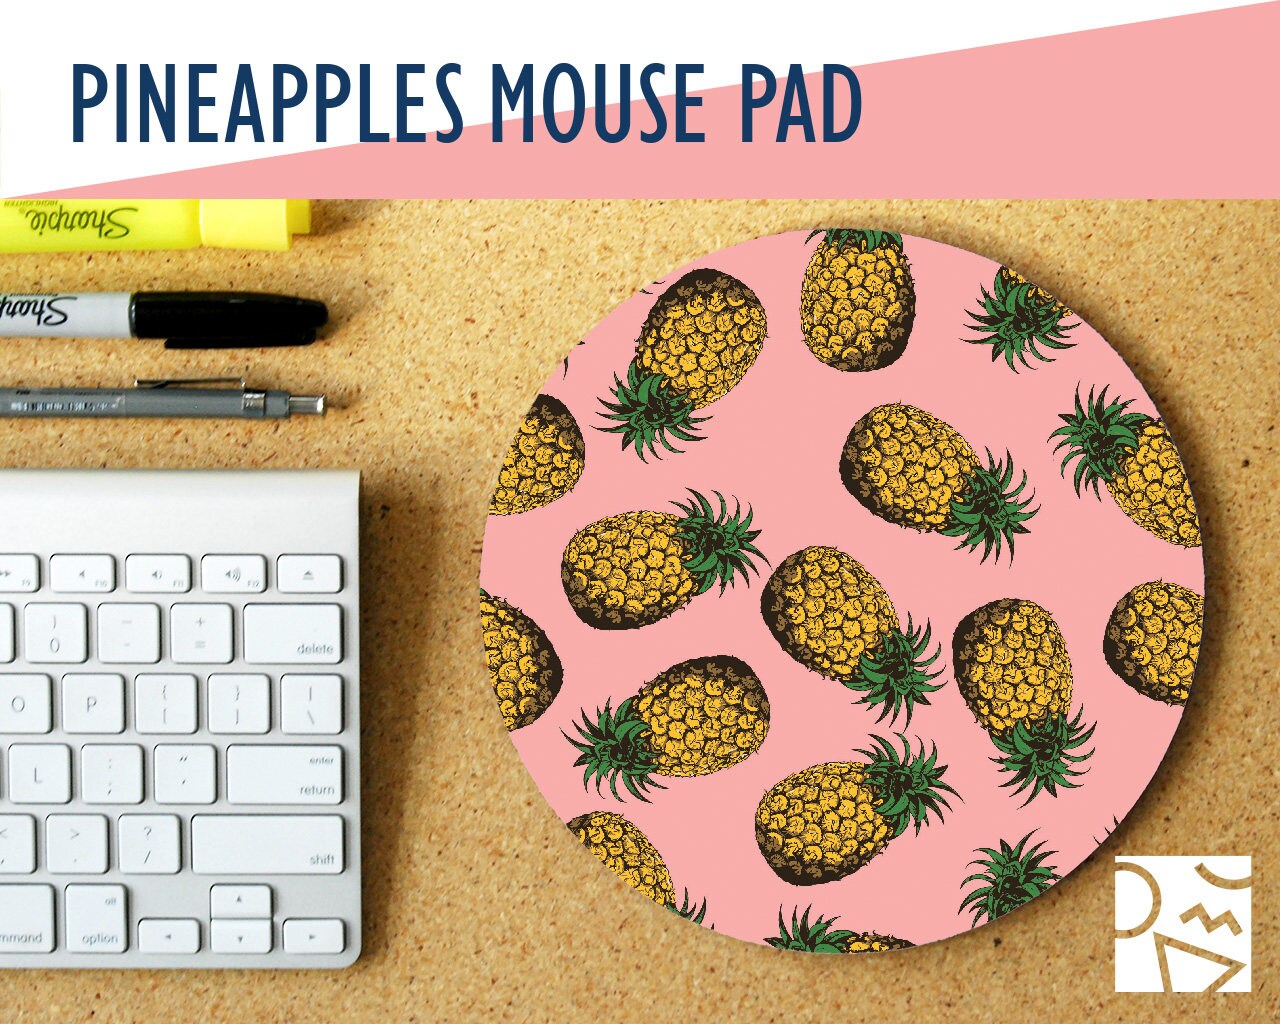 Pineapple Print Mouse Pad, Desk Accessories, Office Decor for